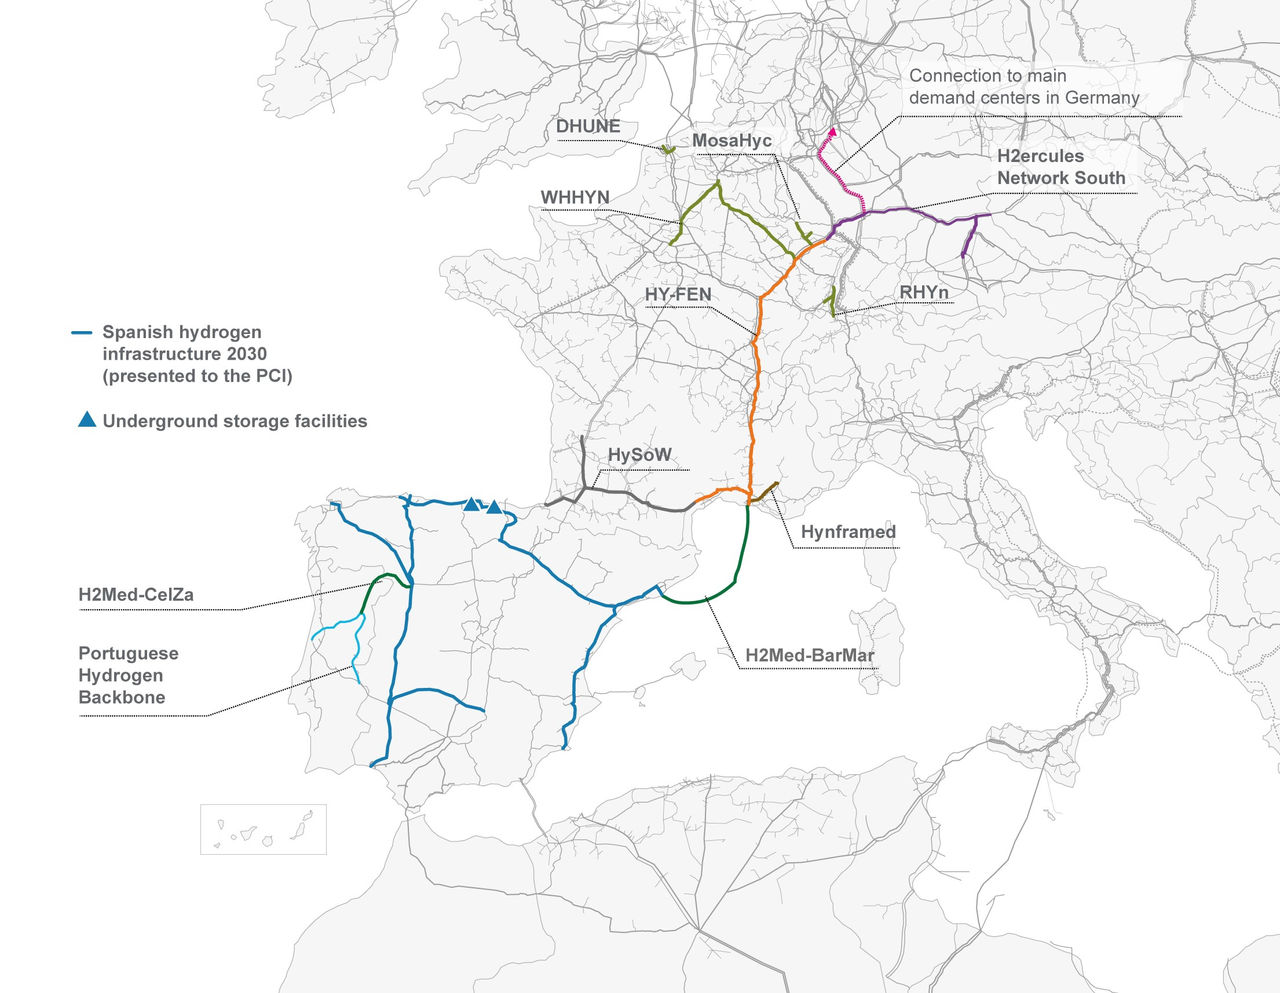 Vision of the European hydrogen network in 2030